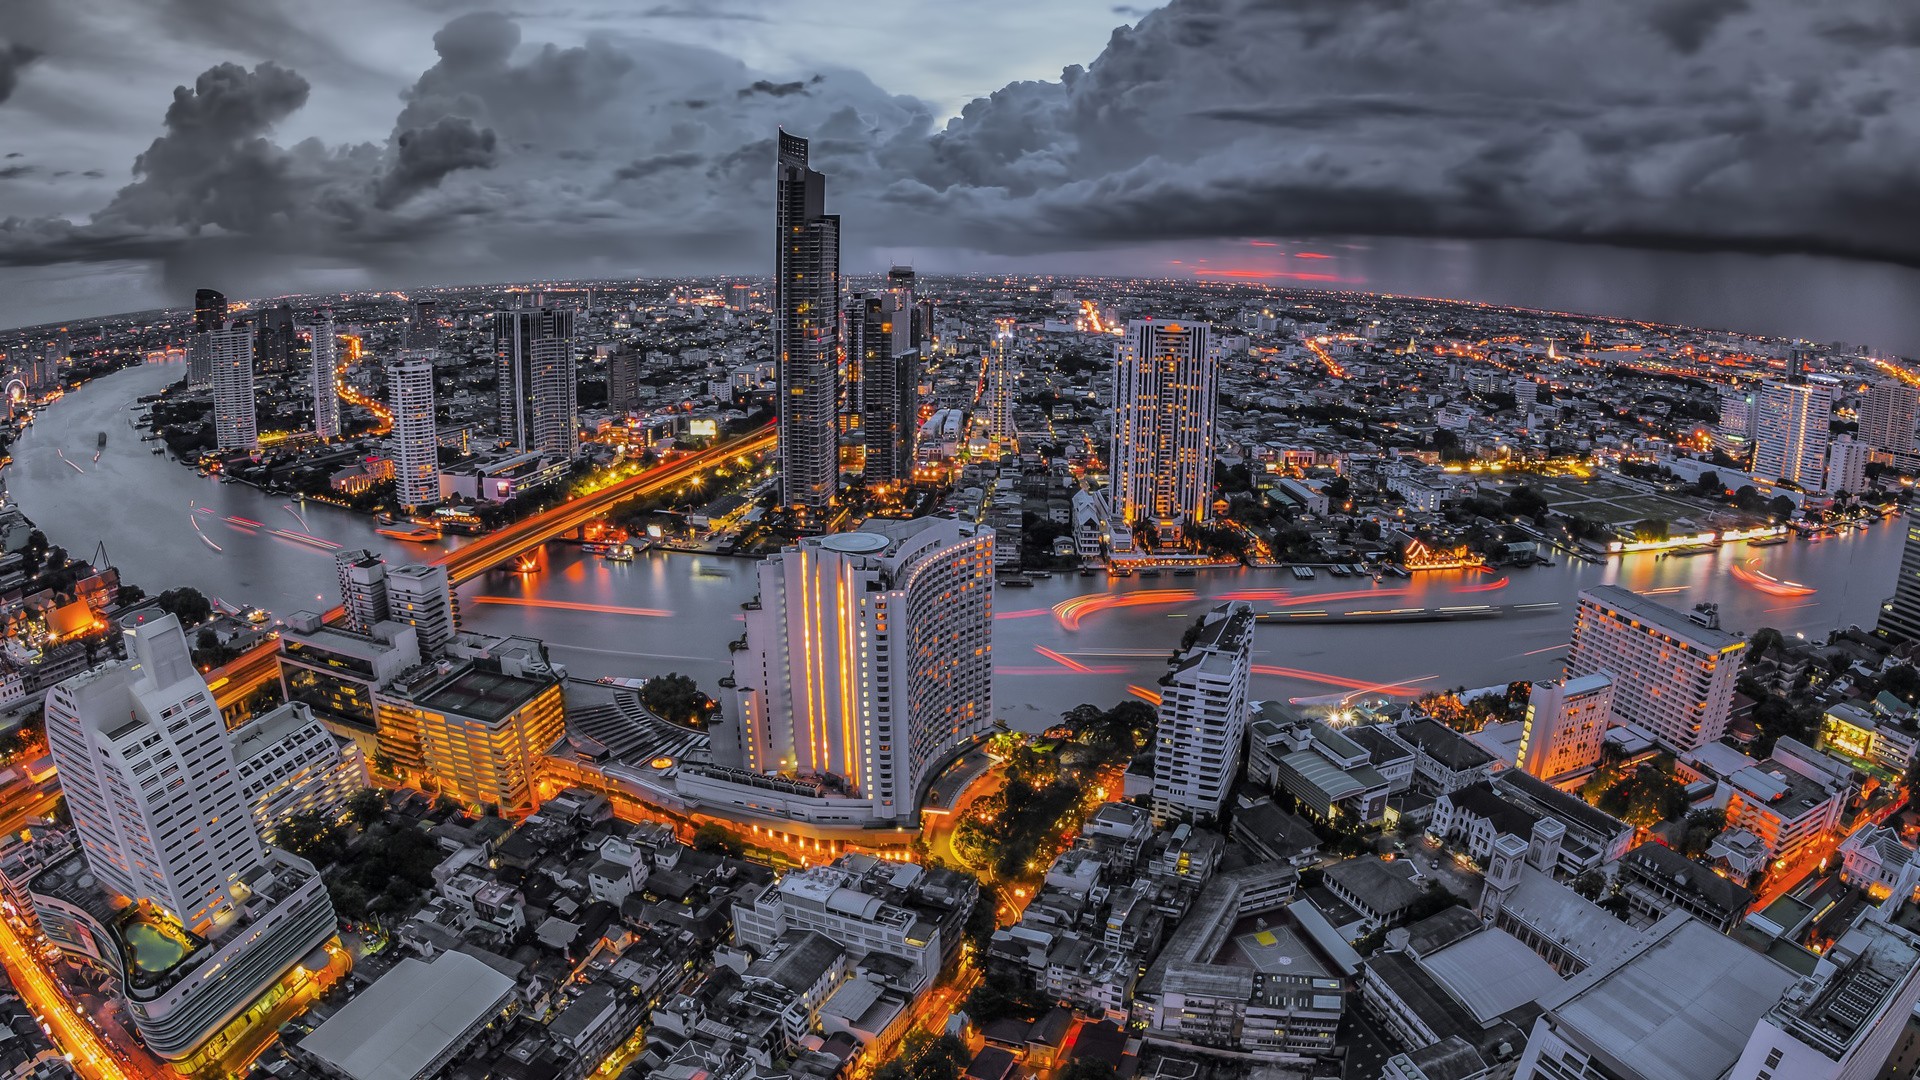 General 1920x1080 city cityscape Thailand Bangkok city lights river clouds skyscraper Asia long exposure selective coloring light trails